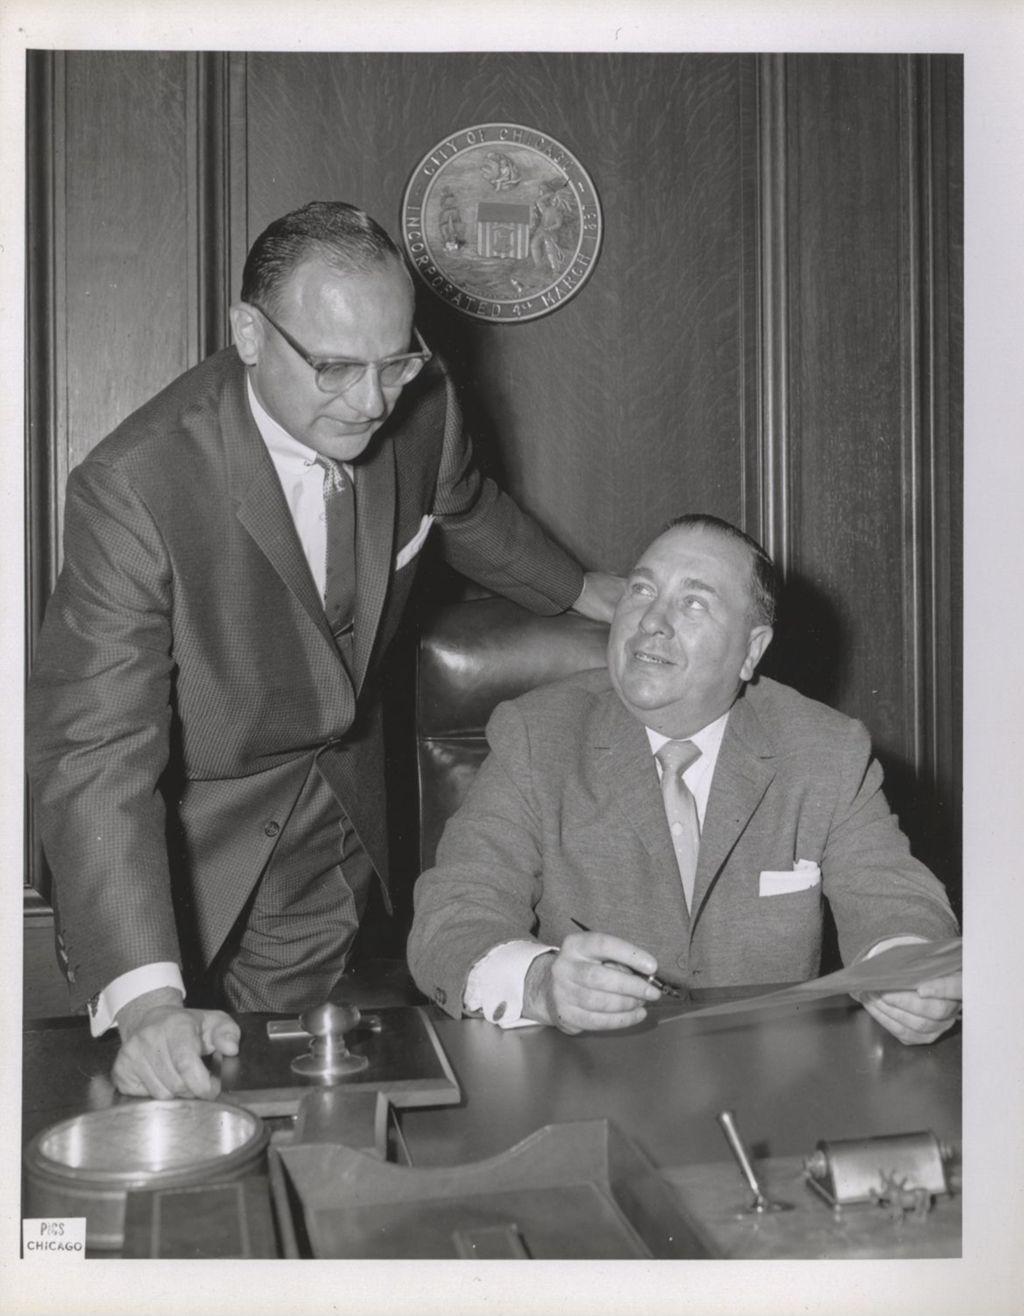 Miniature of Richard J. Daley at his desk with a man next to him